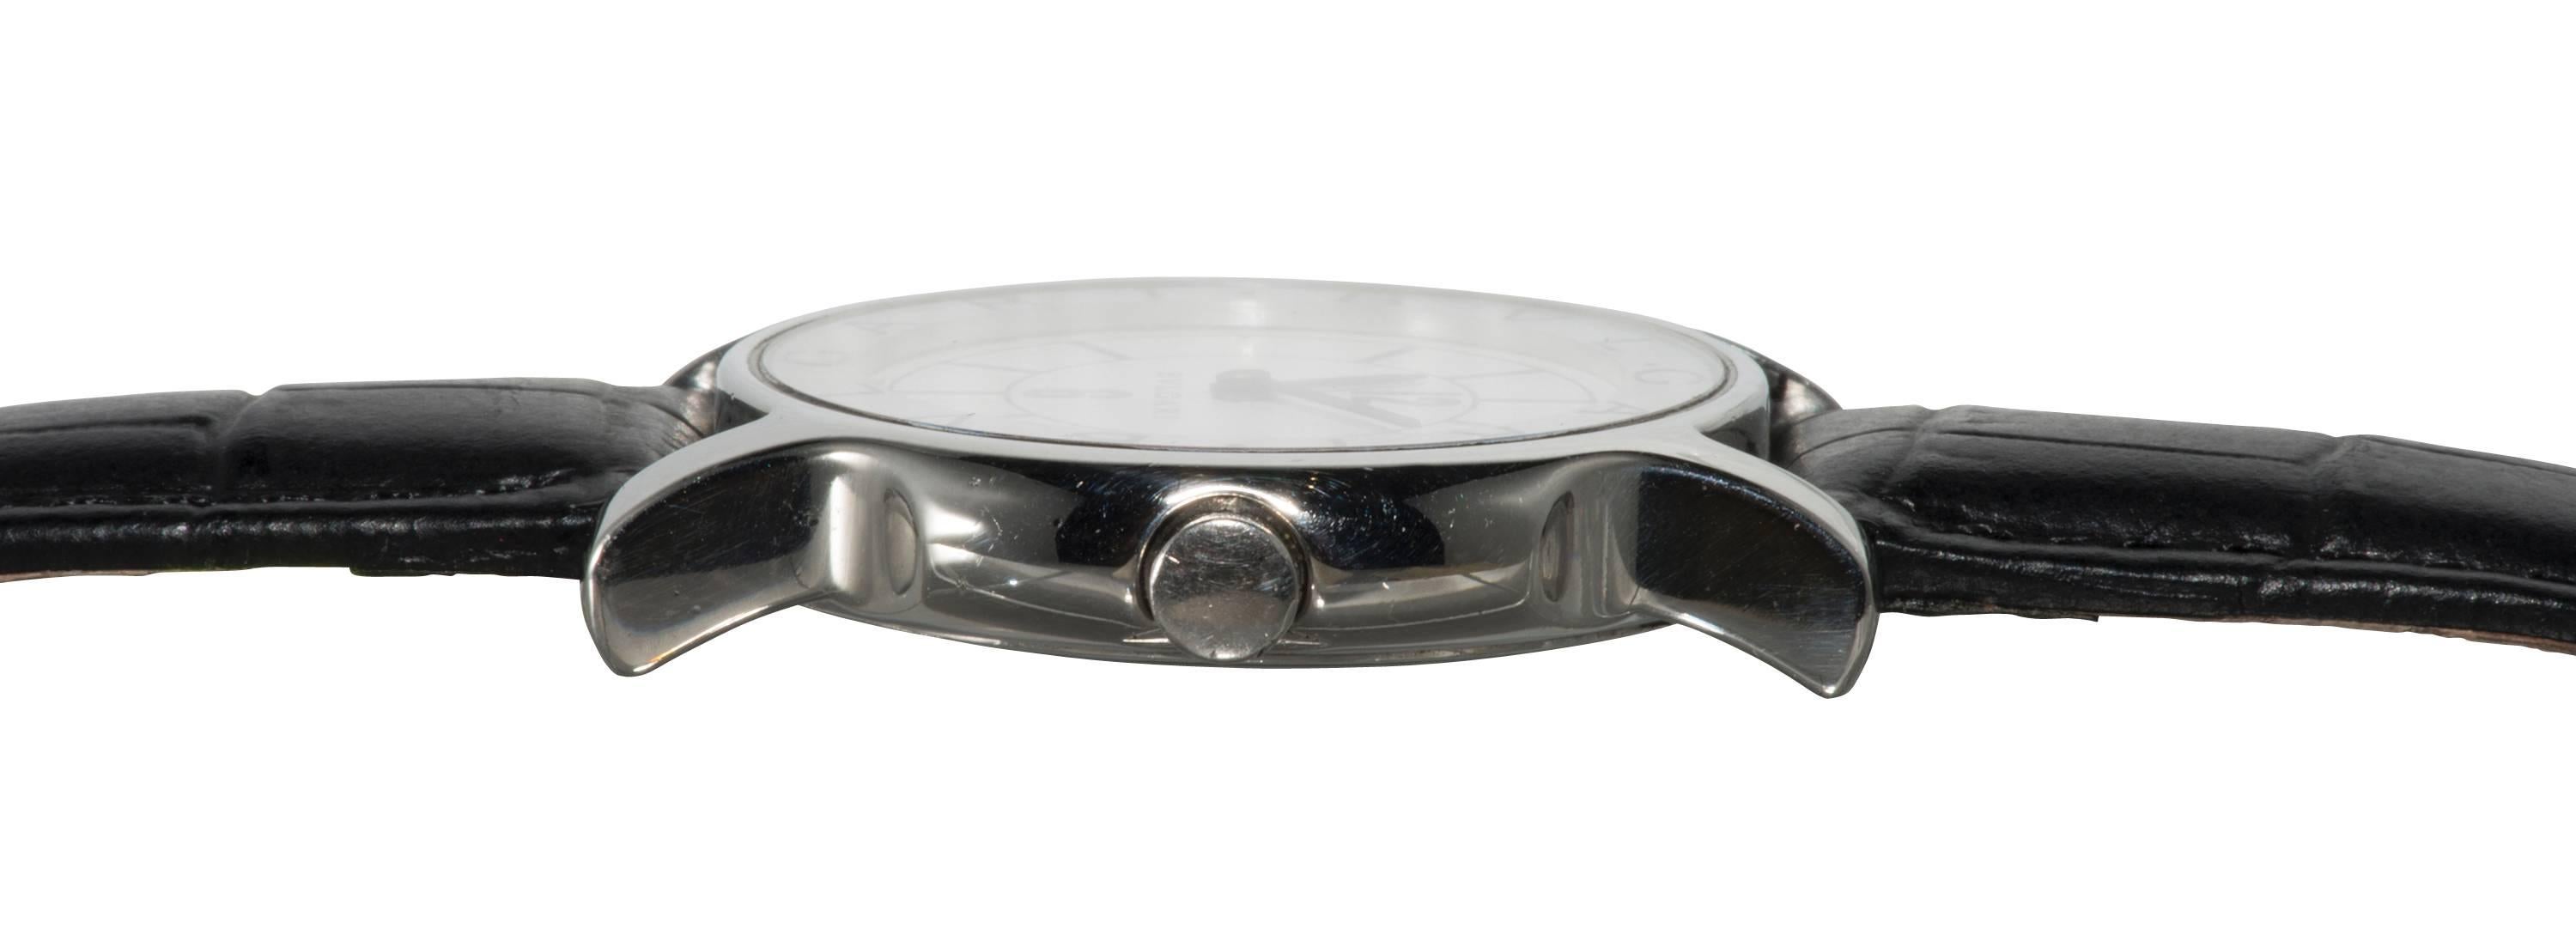 This is a unisex stainless Bulgari watch.